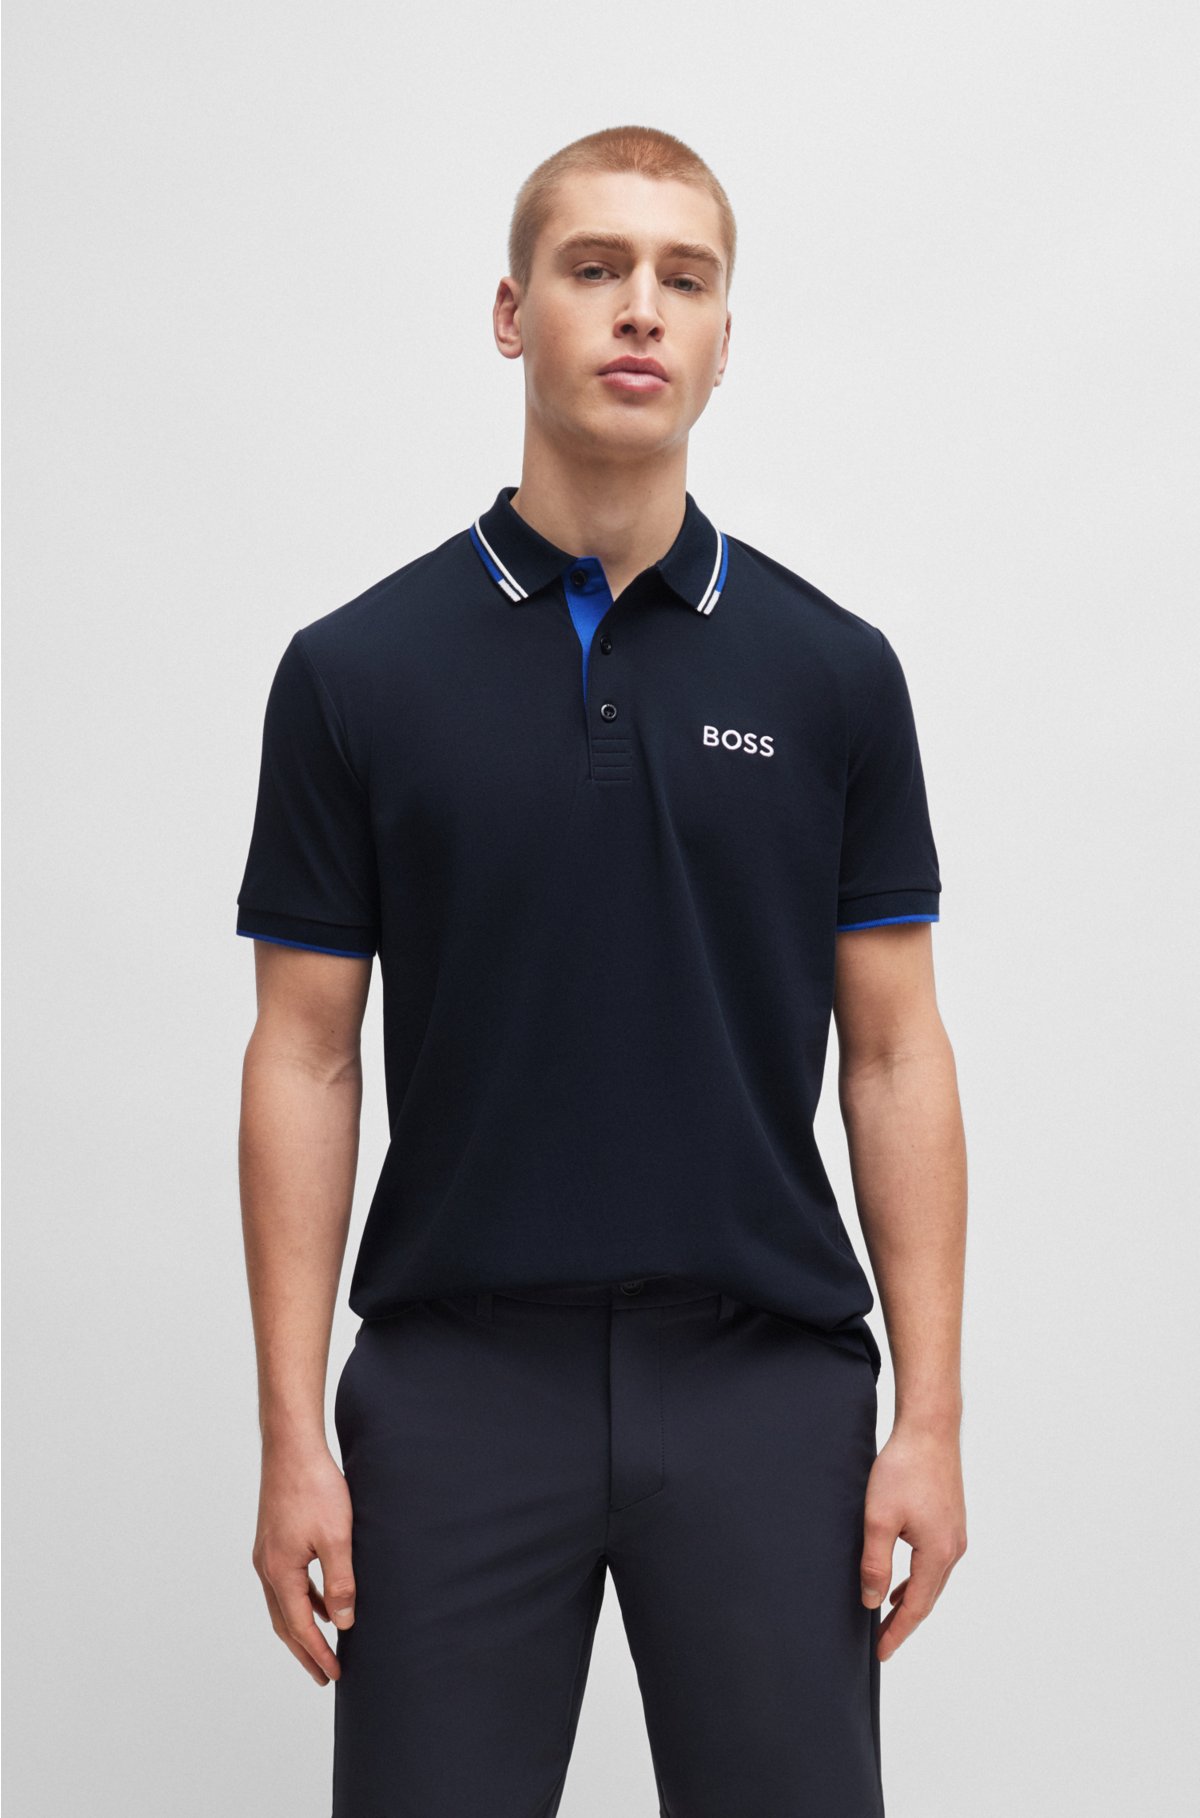 with contrast Polo - shirt logos BOSS